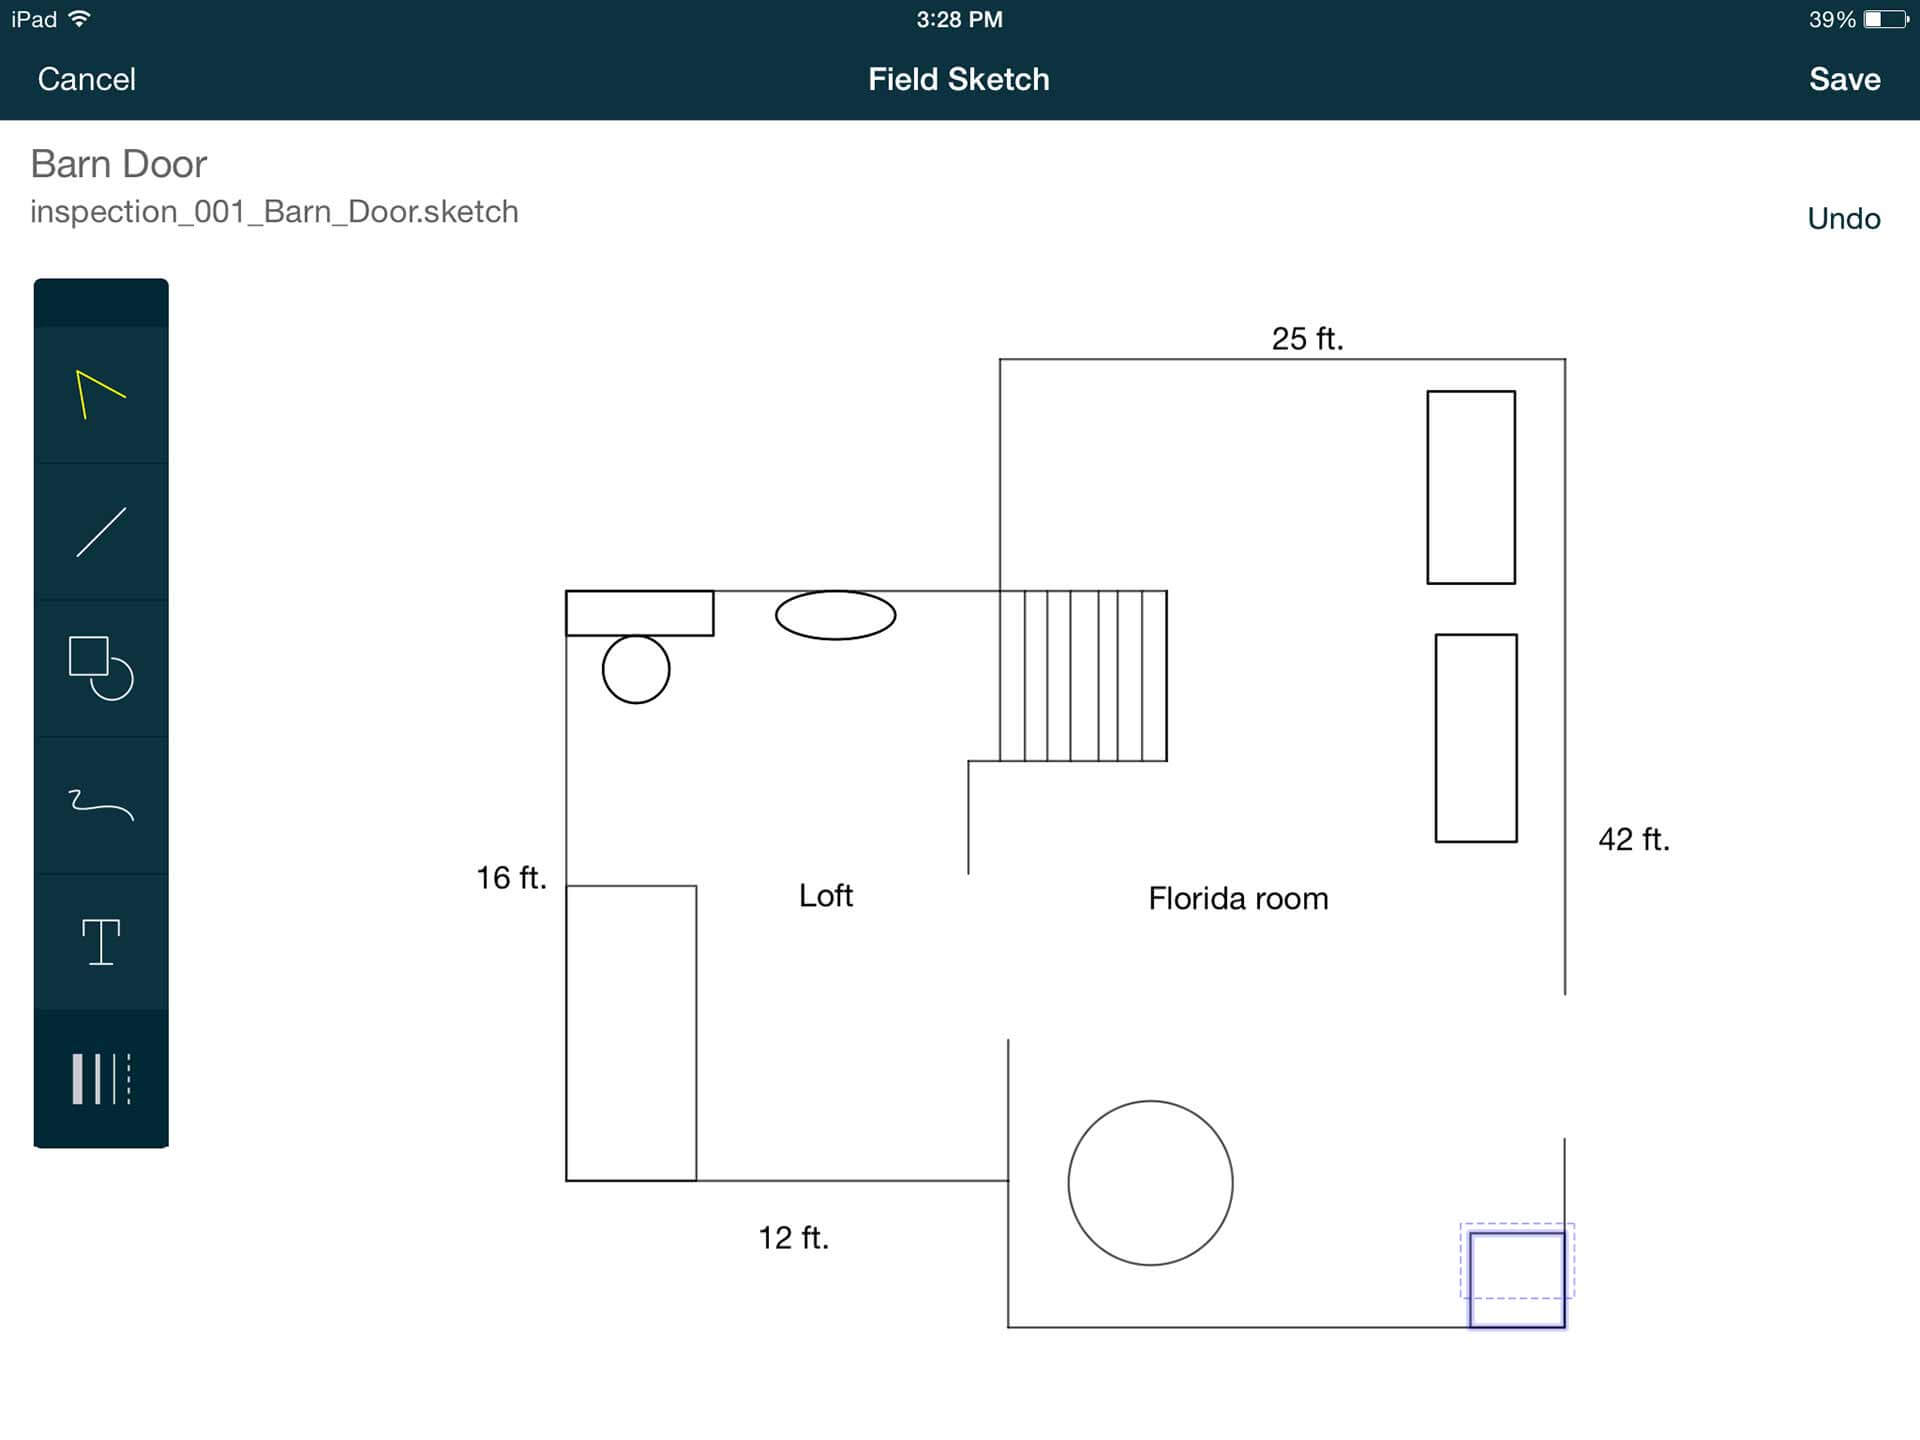 Spex on iOS and the Inspection Schematics Tool